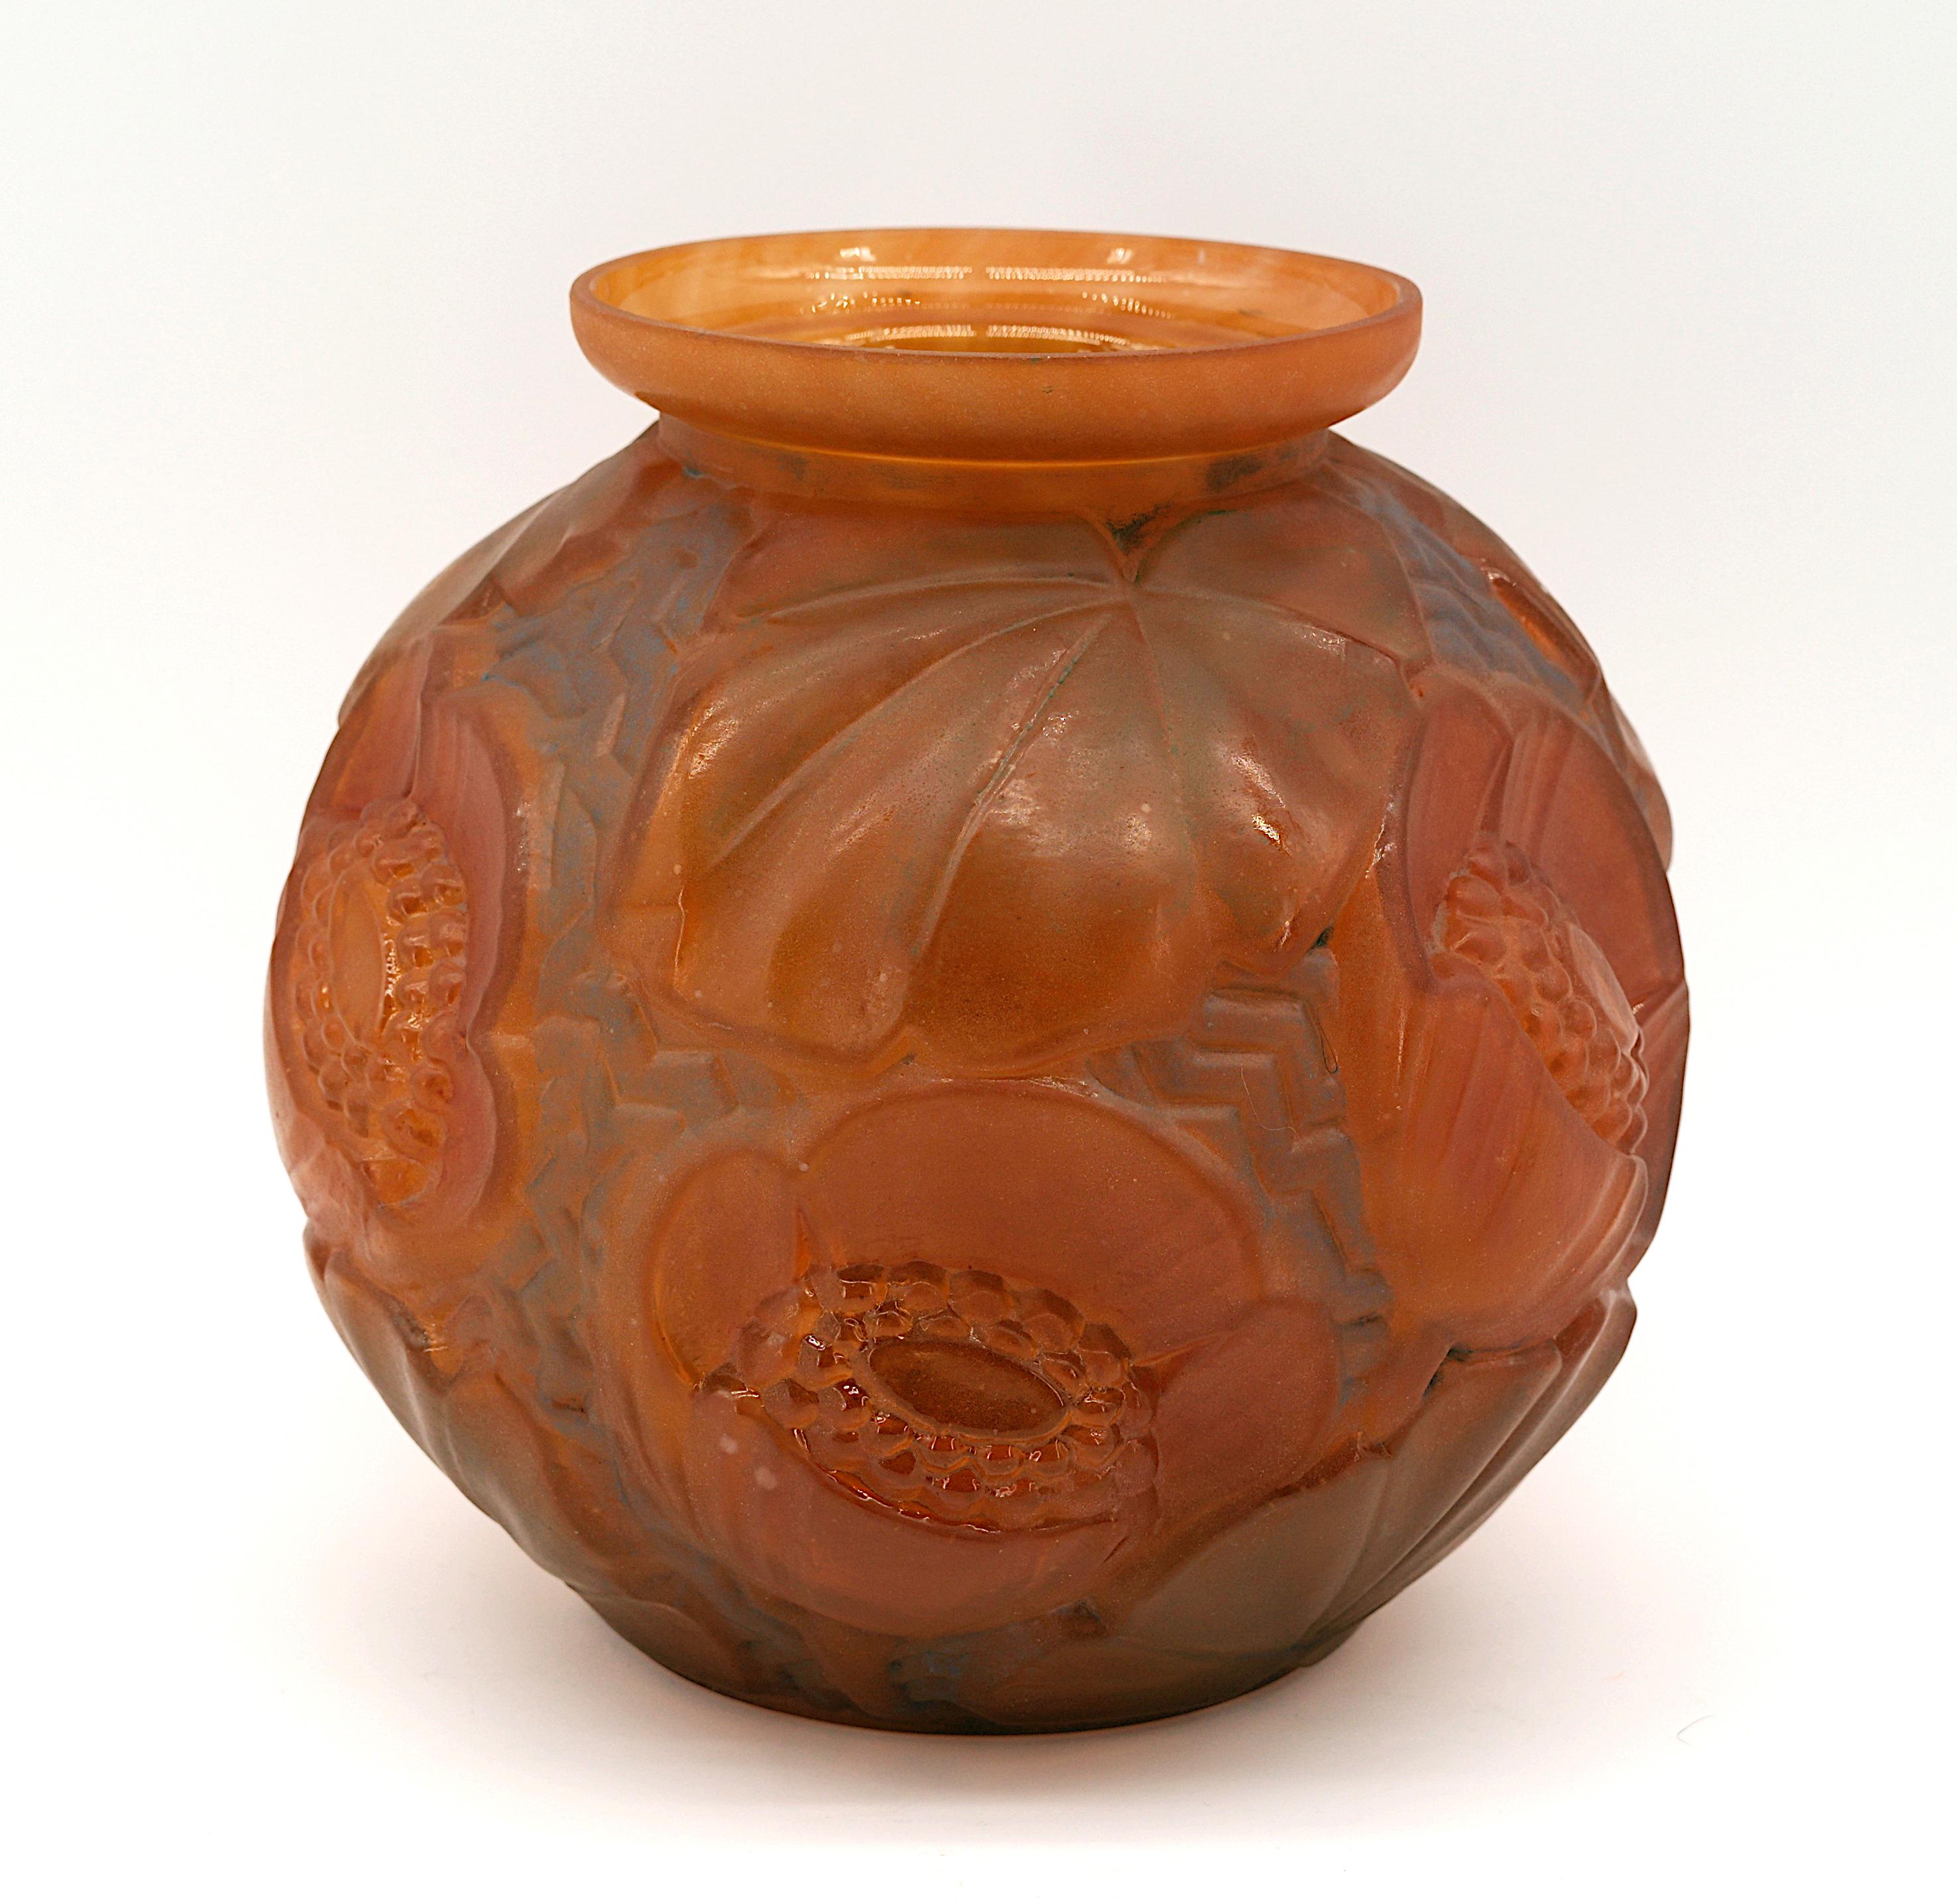 Patinated DAUM Pierre d'AVESN Large French Art Deco Floral Vase, Early 1930s For Sale